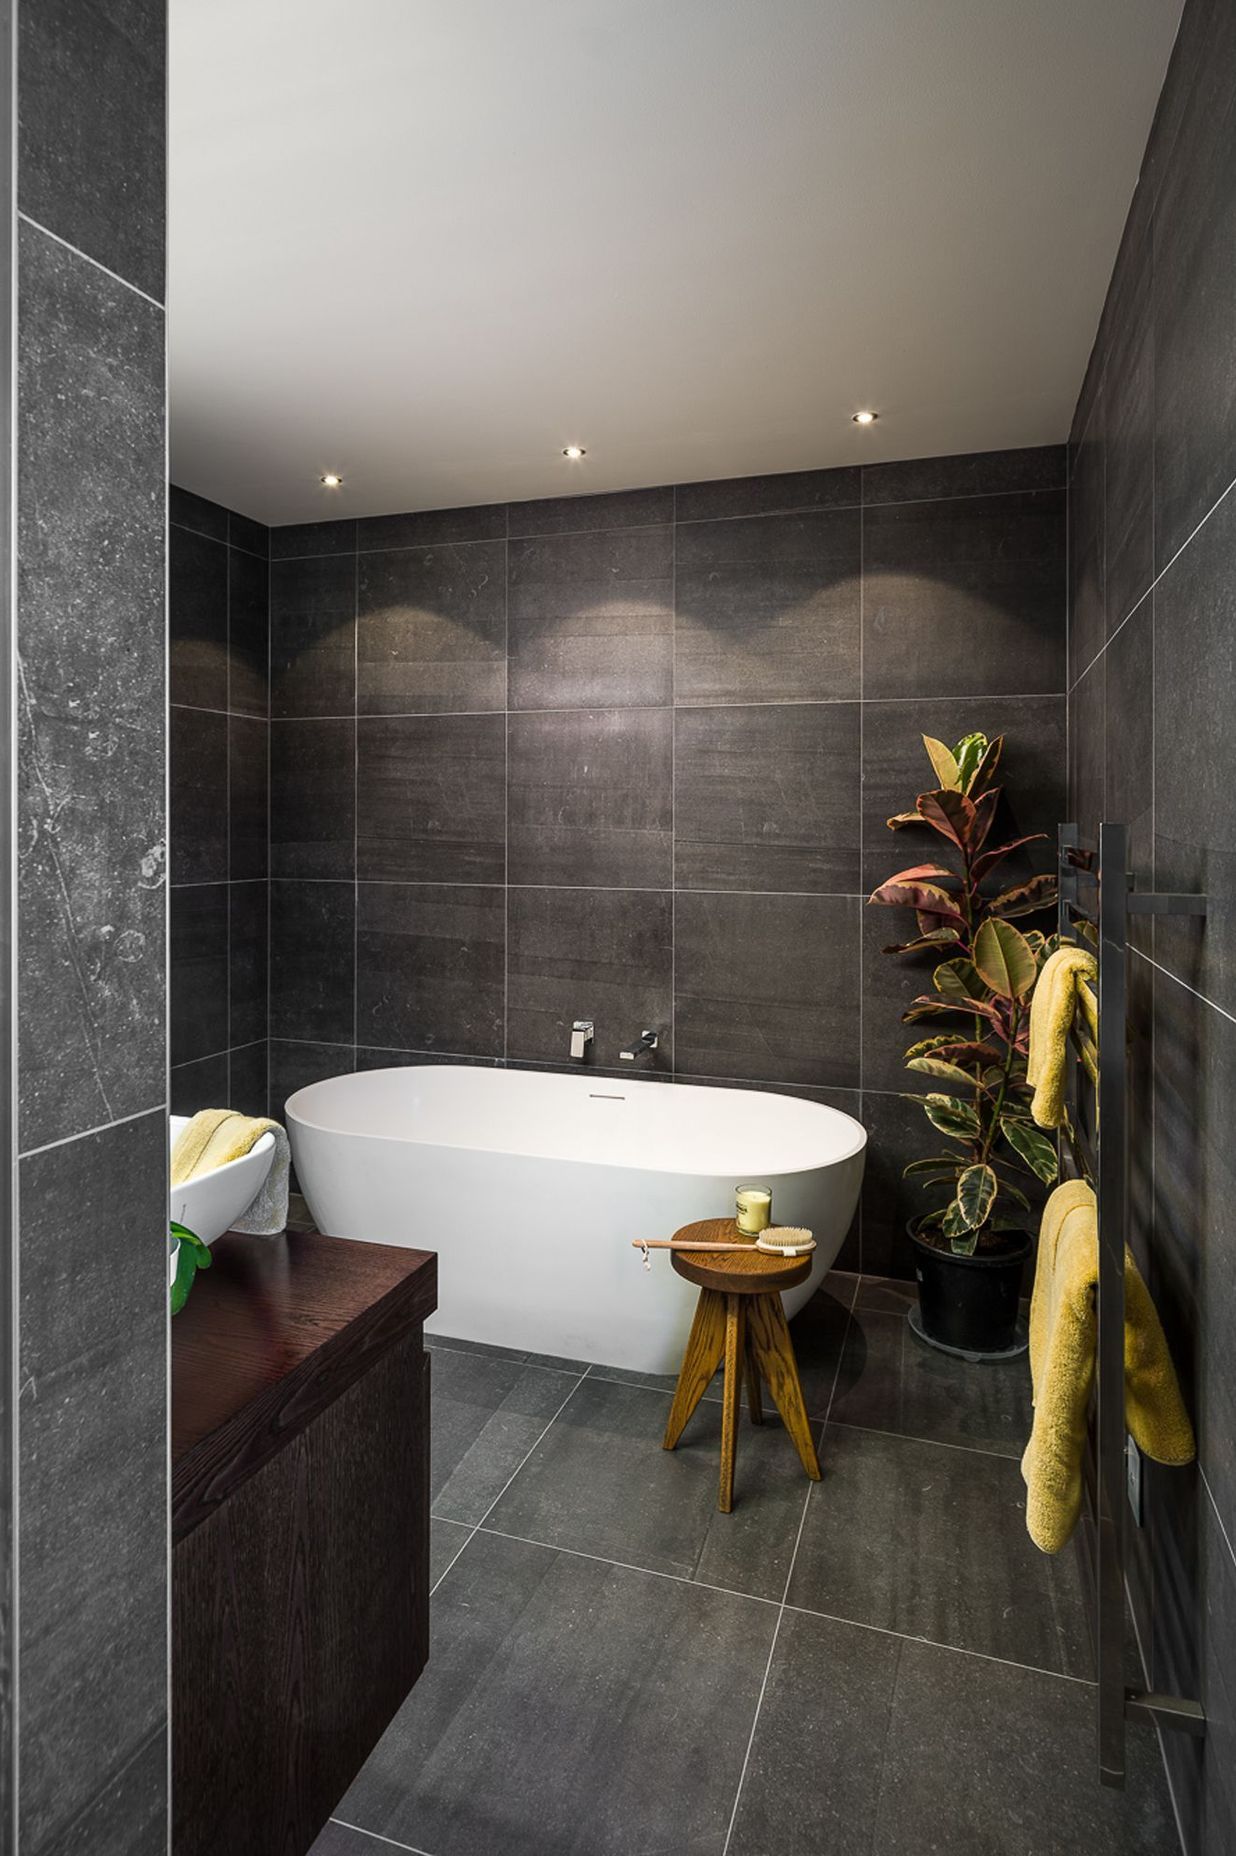 Large-format tiles add a sense of drama to this bathroom and reinforce the dichromatic colour scheme.